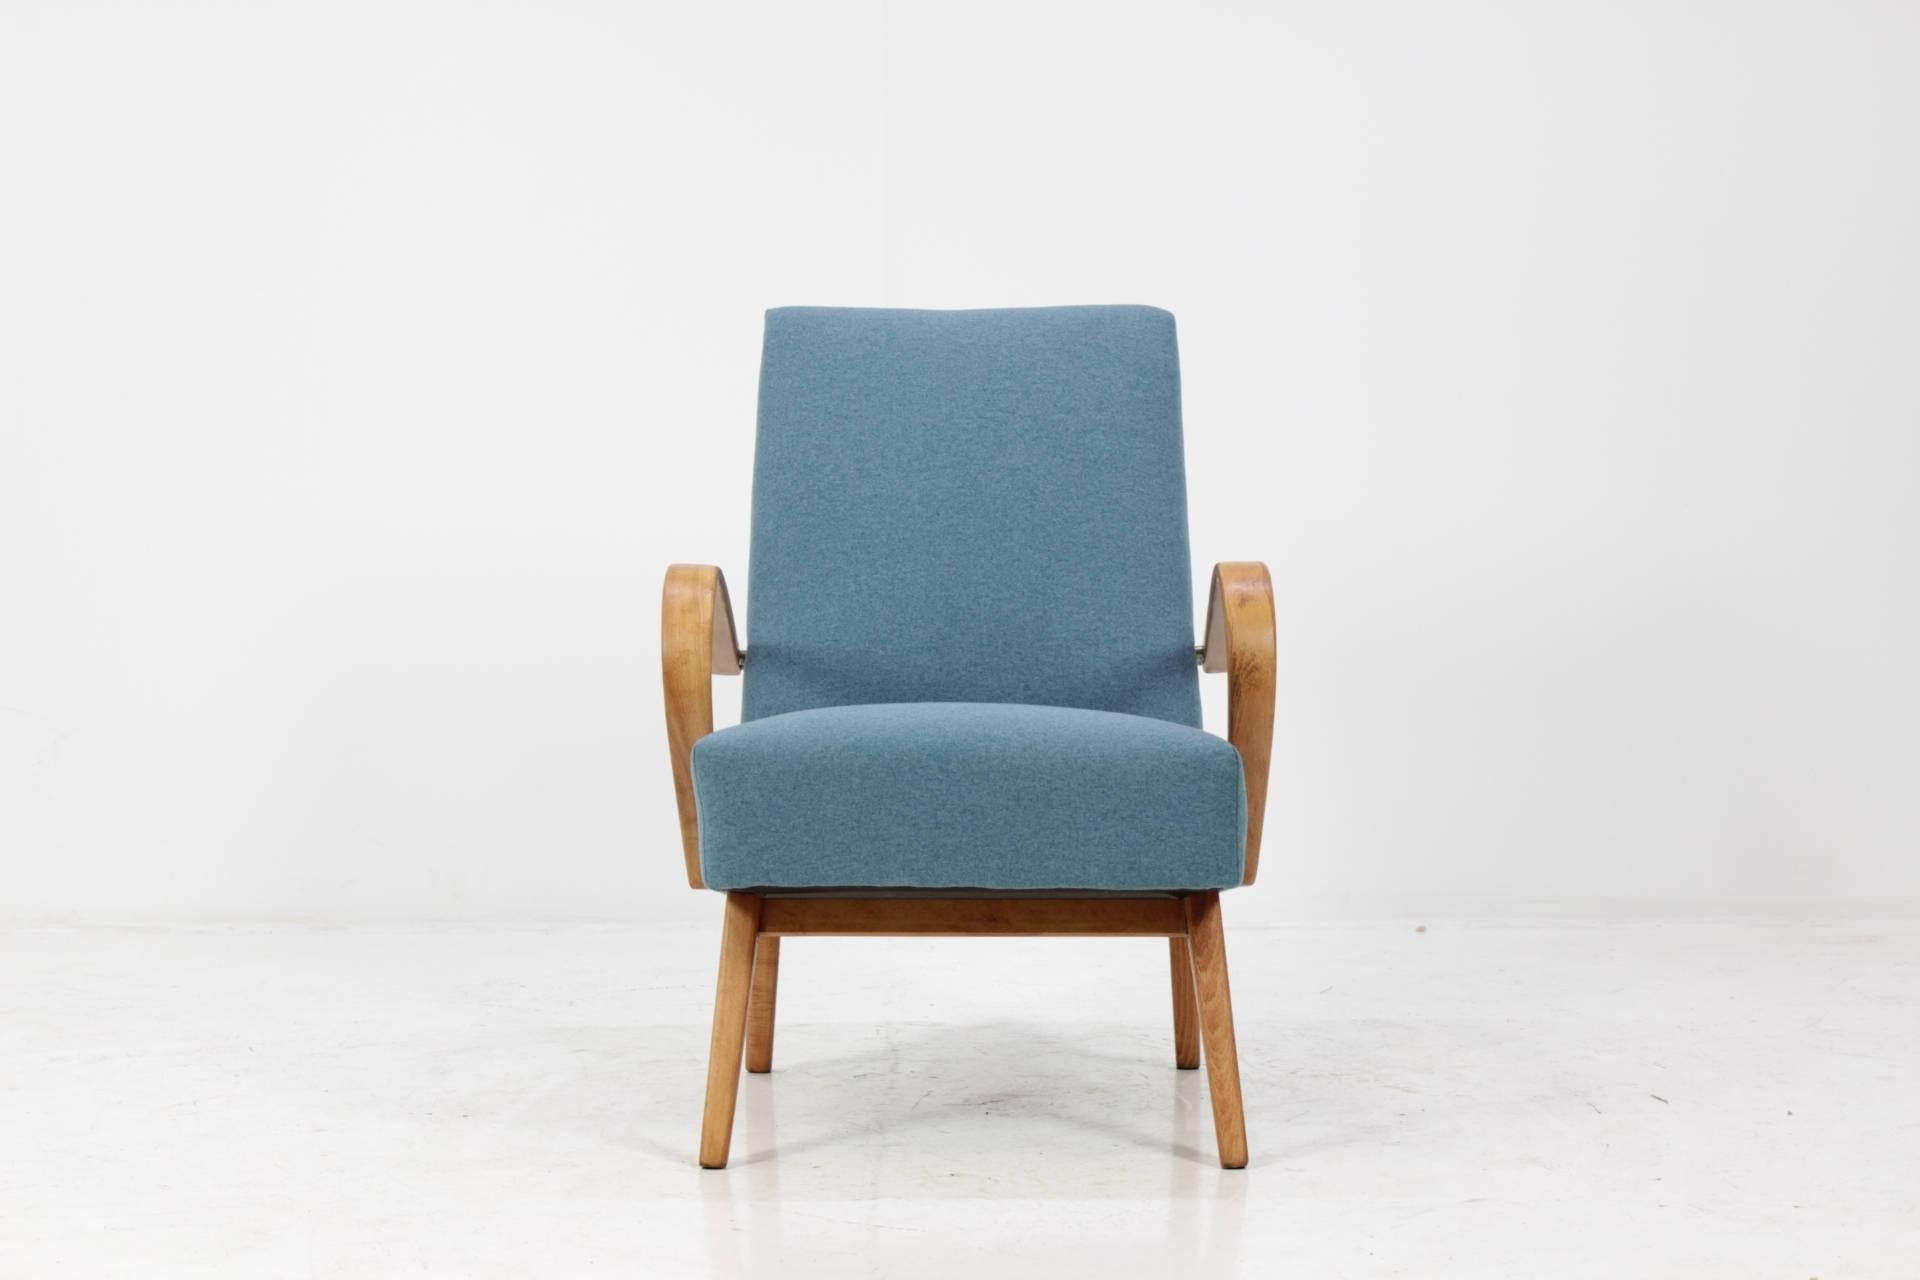 This chair was made in Czech Republic during 1960s by Thon company (before Thonet). Legs and bentwood armrests are made from beech wood and features new fabric upholstery. Very good condition.